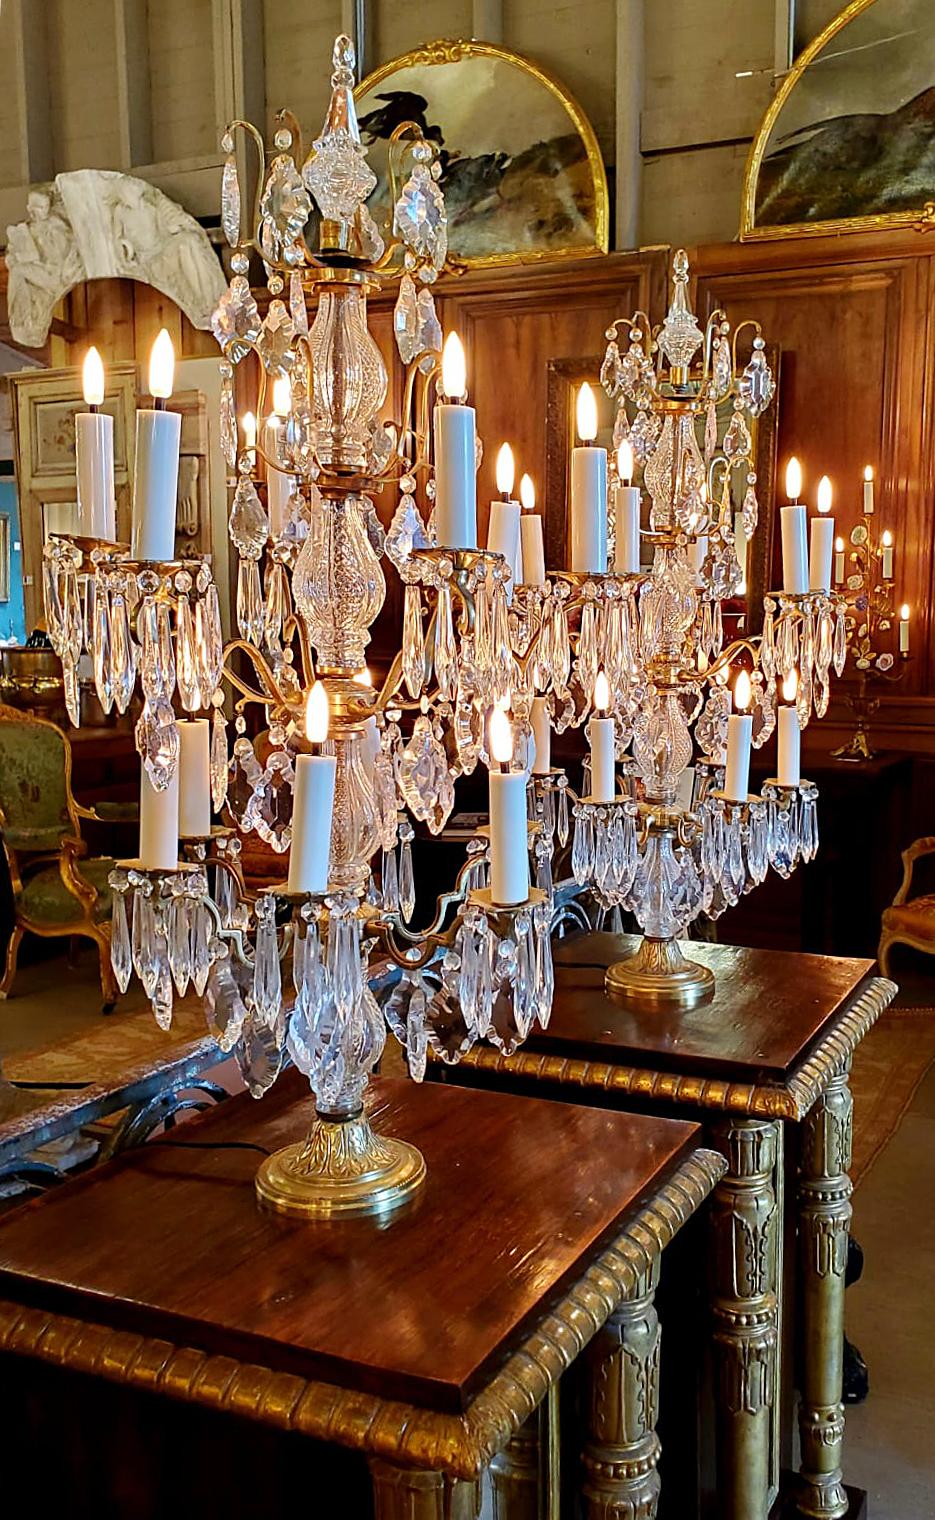 These crystal chandelier-style table lamps each stand 36